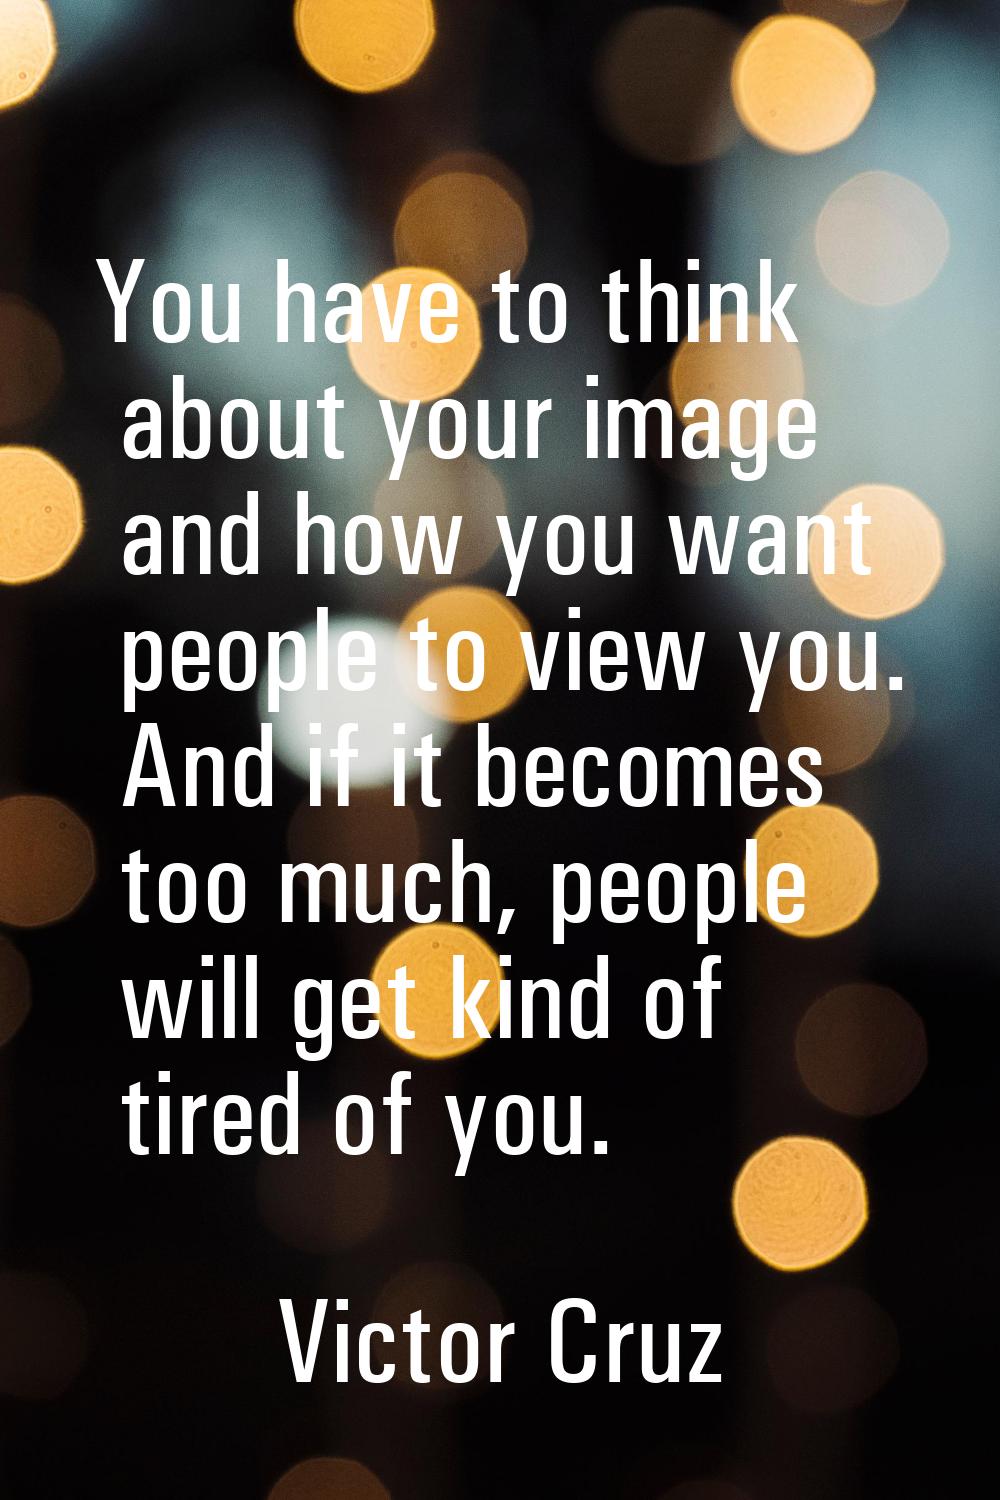 You have to think about your image and how you want people to view you. And if it becomes too much,